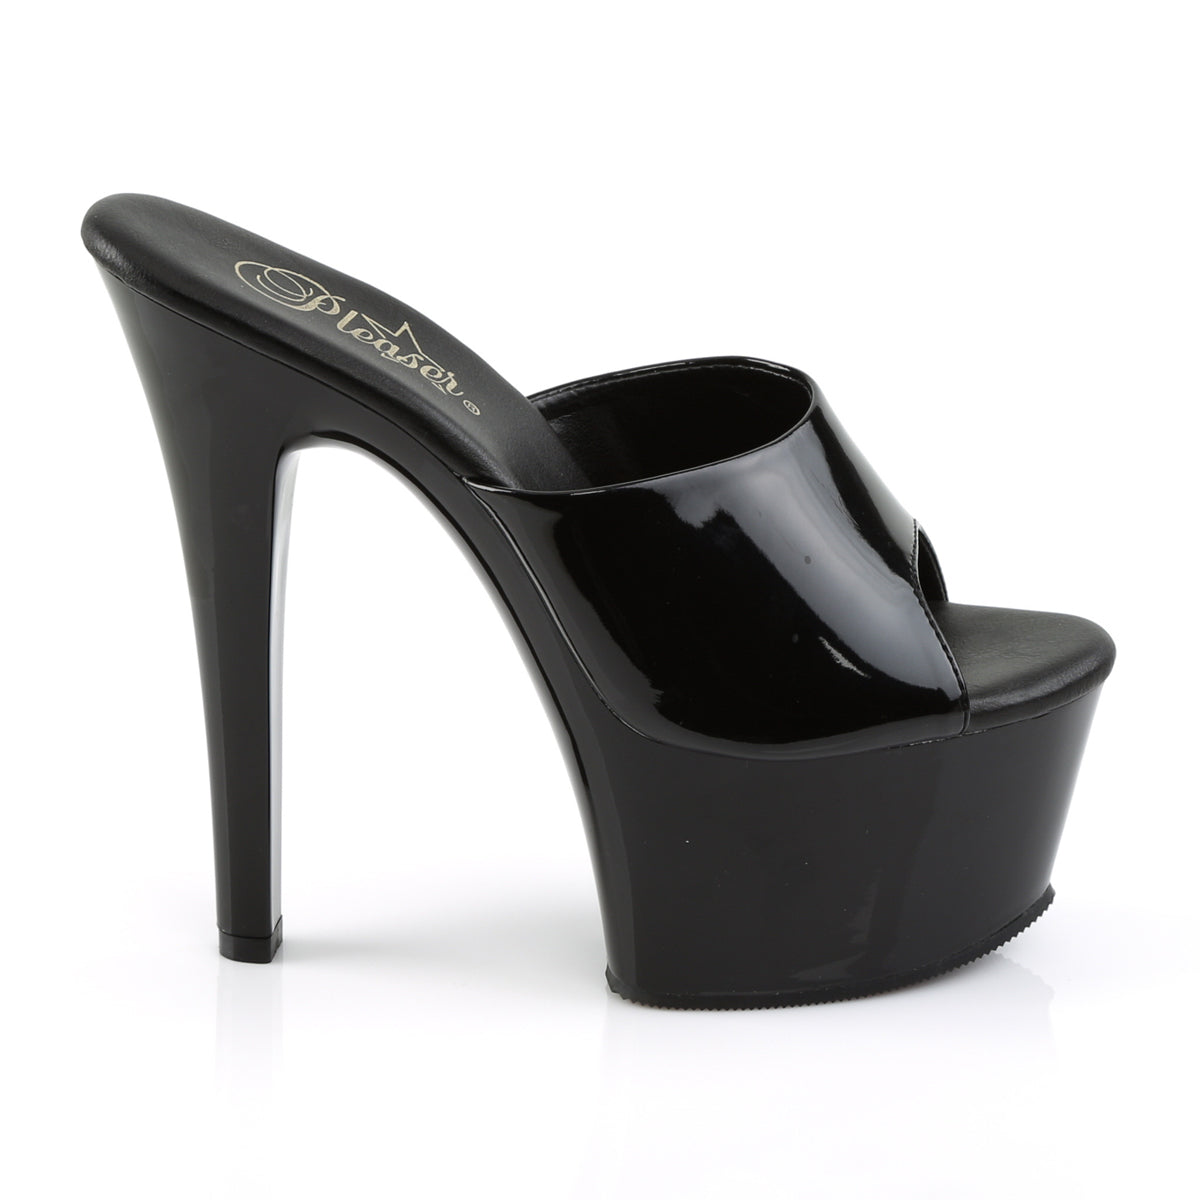 ASPIRE-601 Sexy 6" Heel Black Patent Pole Dancing Shoes-Pleaser- Sexy Shoes Fetish Heels